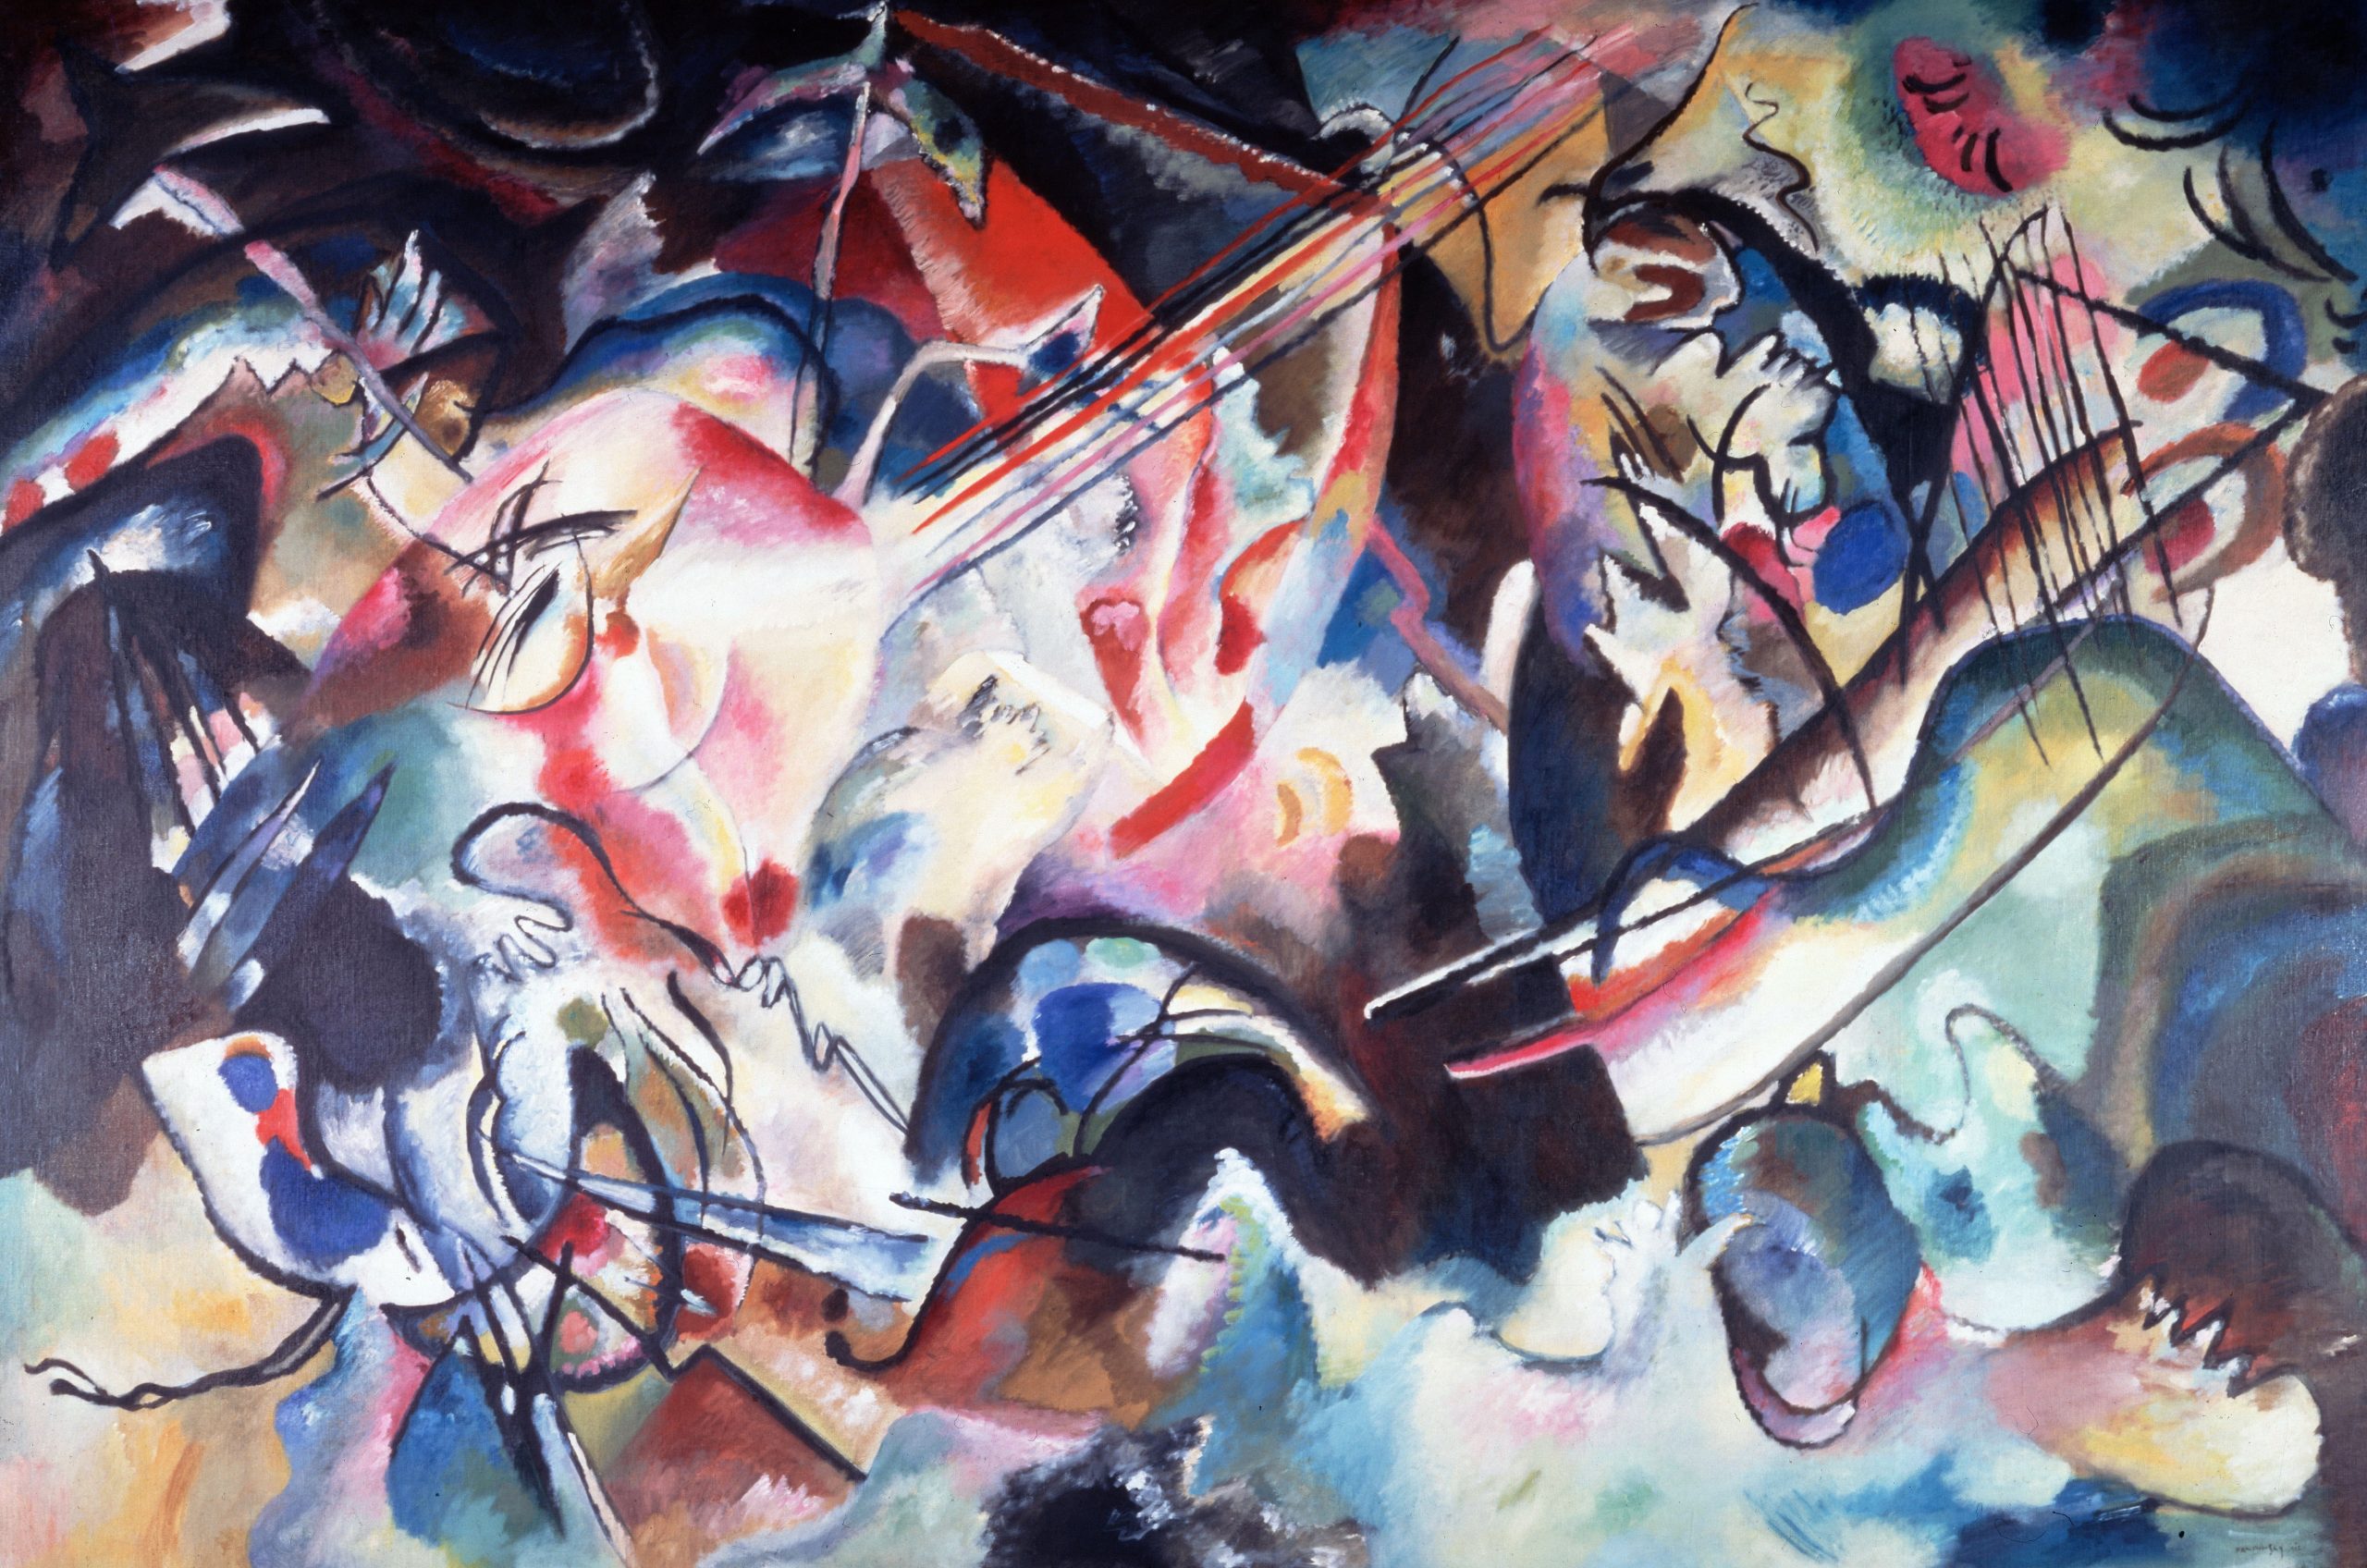 Multicolored abstract painting wallpaper, picture, Wassily Kandinsky, Composition VI